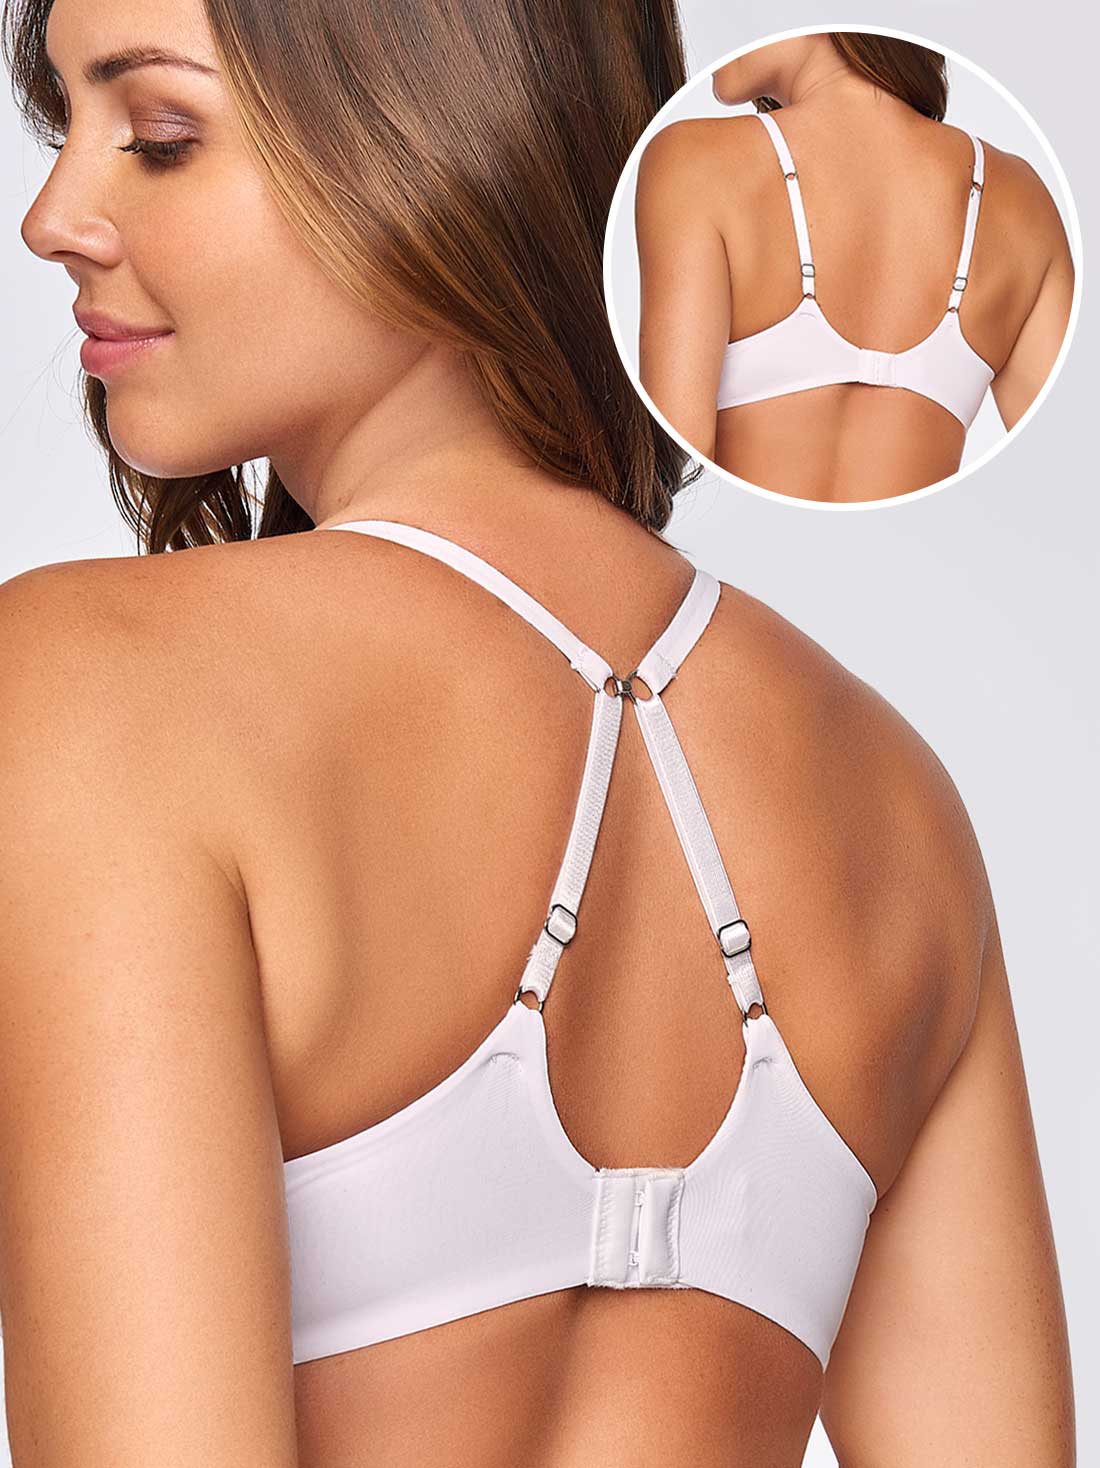 ▷ Push Up bras in your women's intimate fashion store